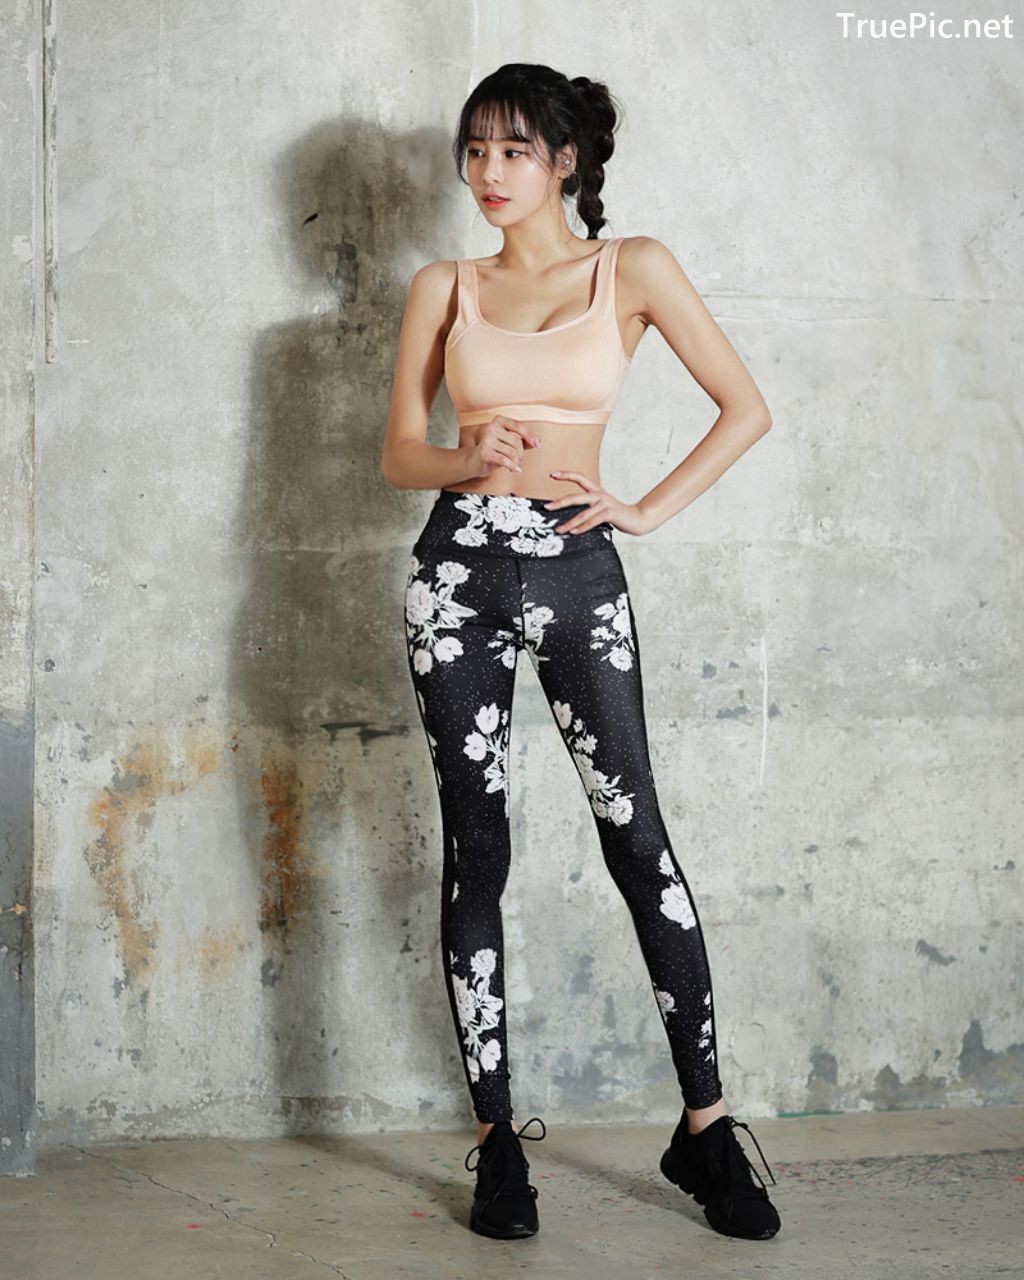 Image-Korean-Fashion-Model-Ju-Woo-Fitness-Set-Collection-TruePic.net- Picture-138